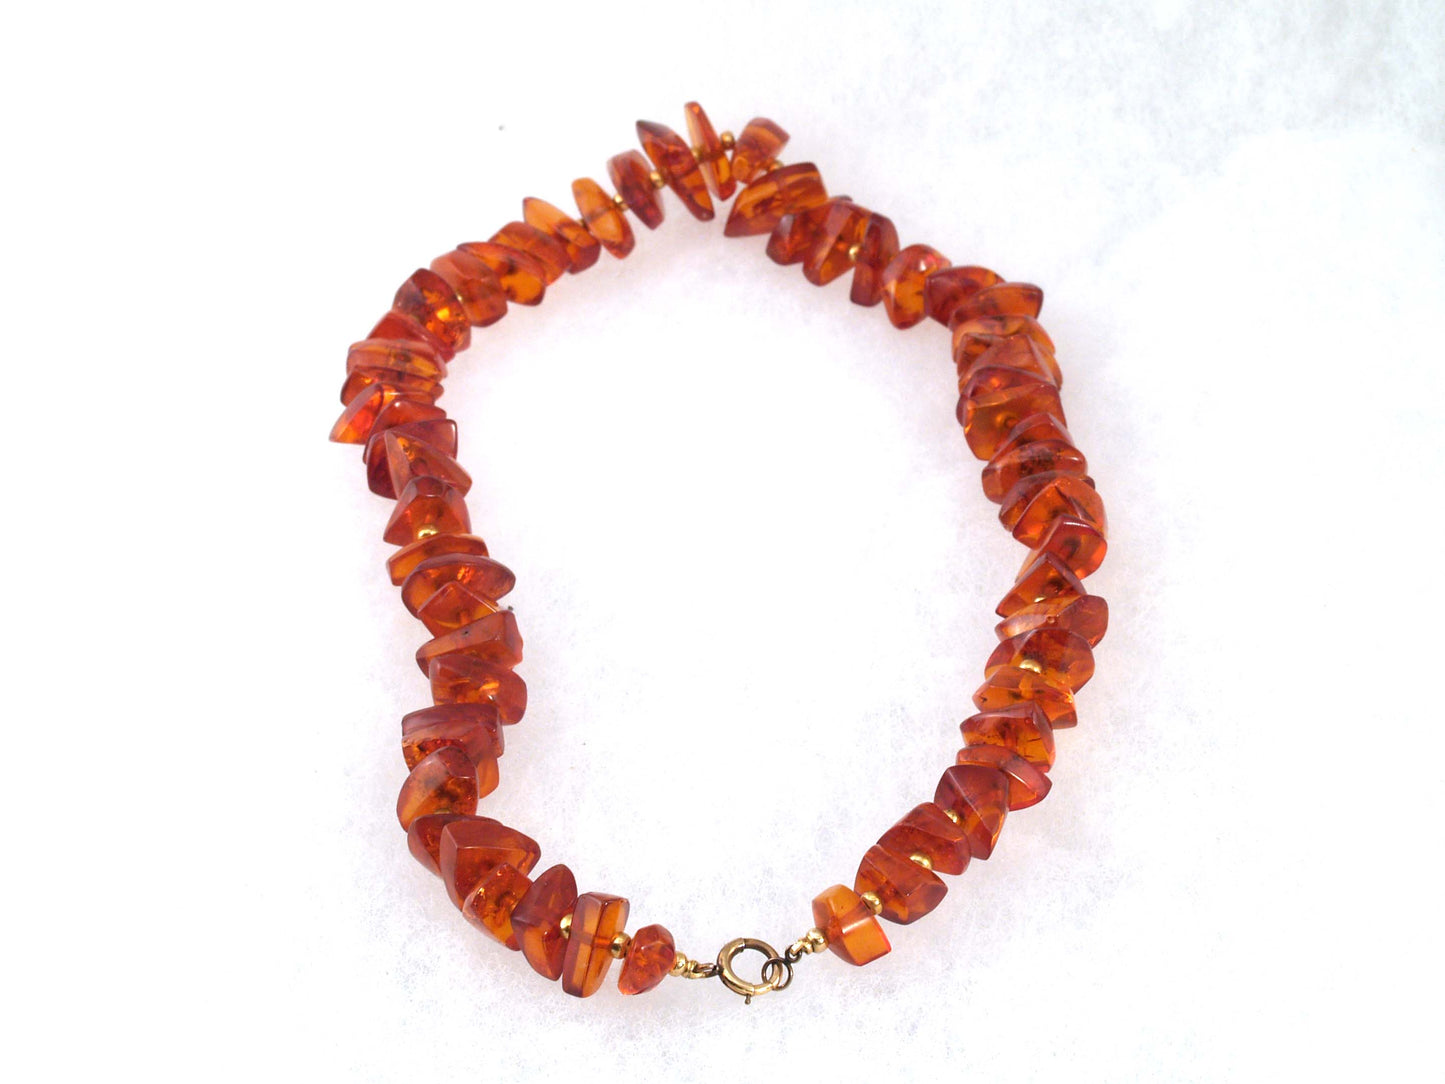 Snowflake Baltic Amber Necklace with Gold Filled Beads and Clasp